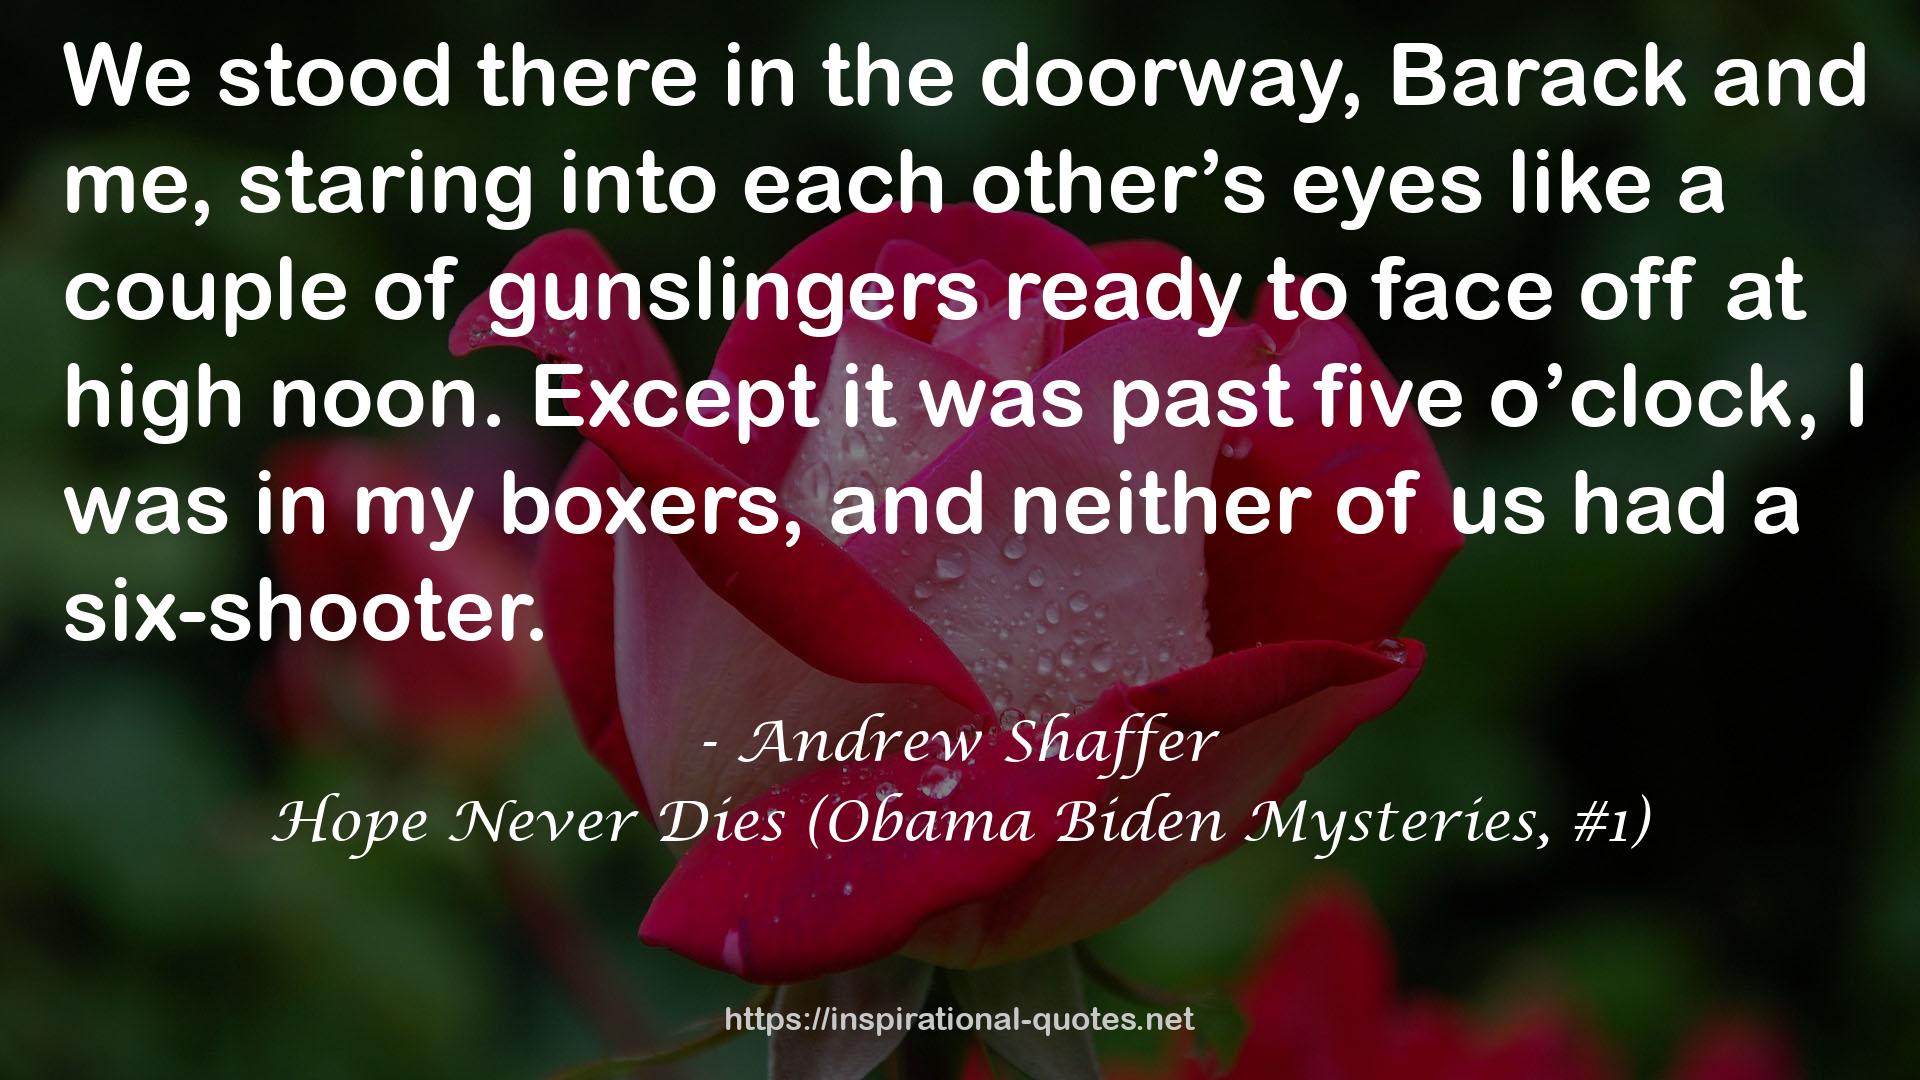 Andrew Shaffer QUOTES